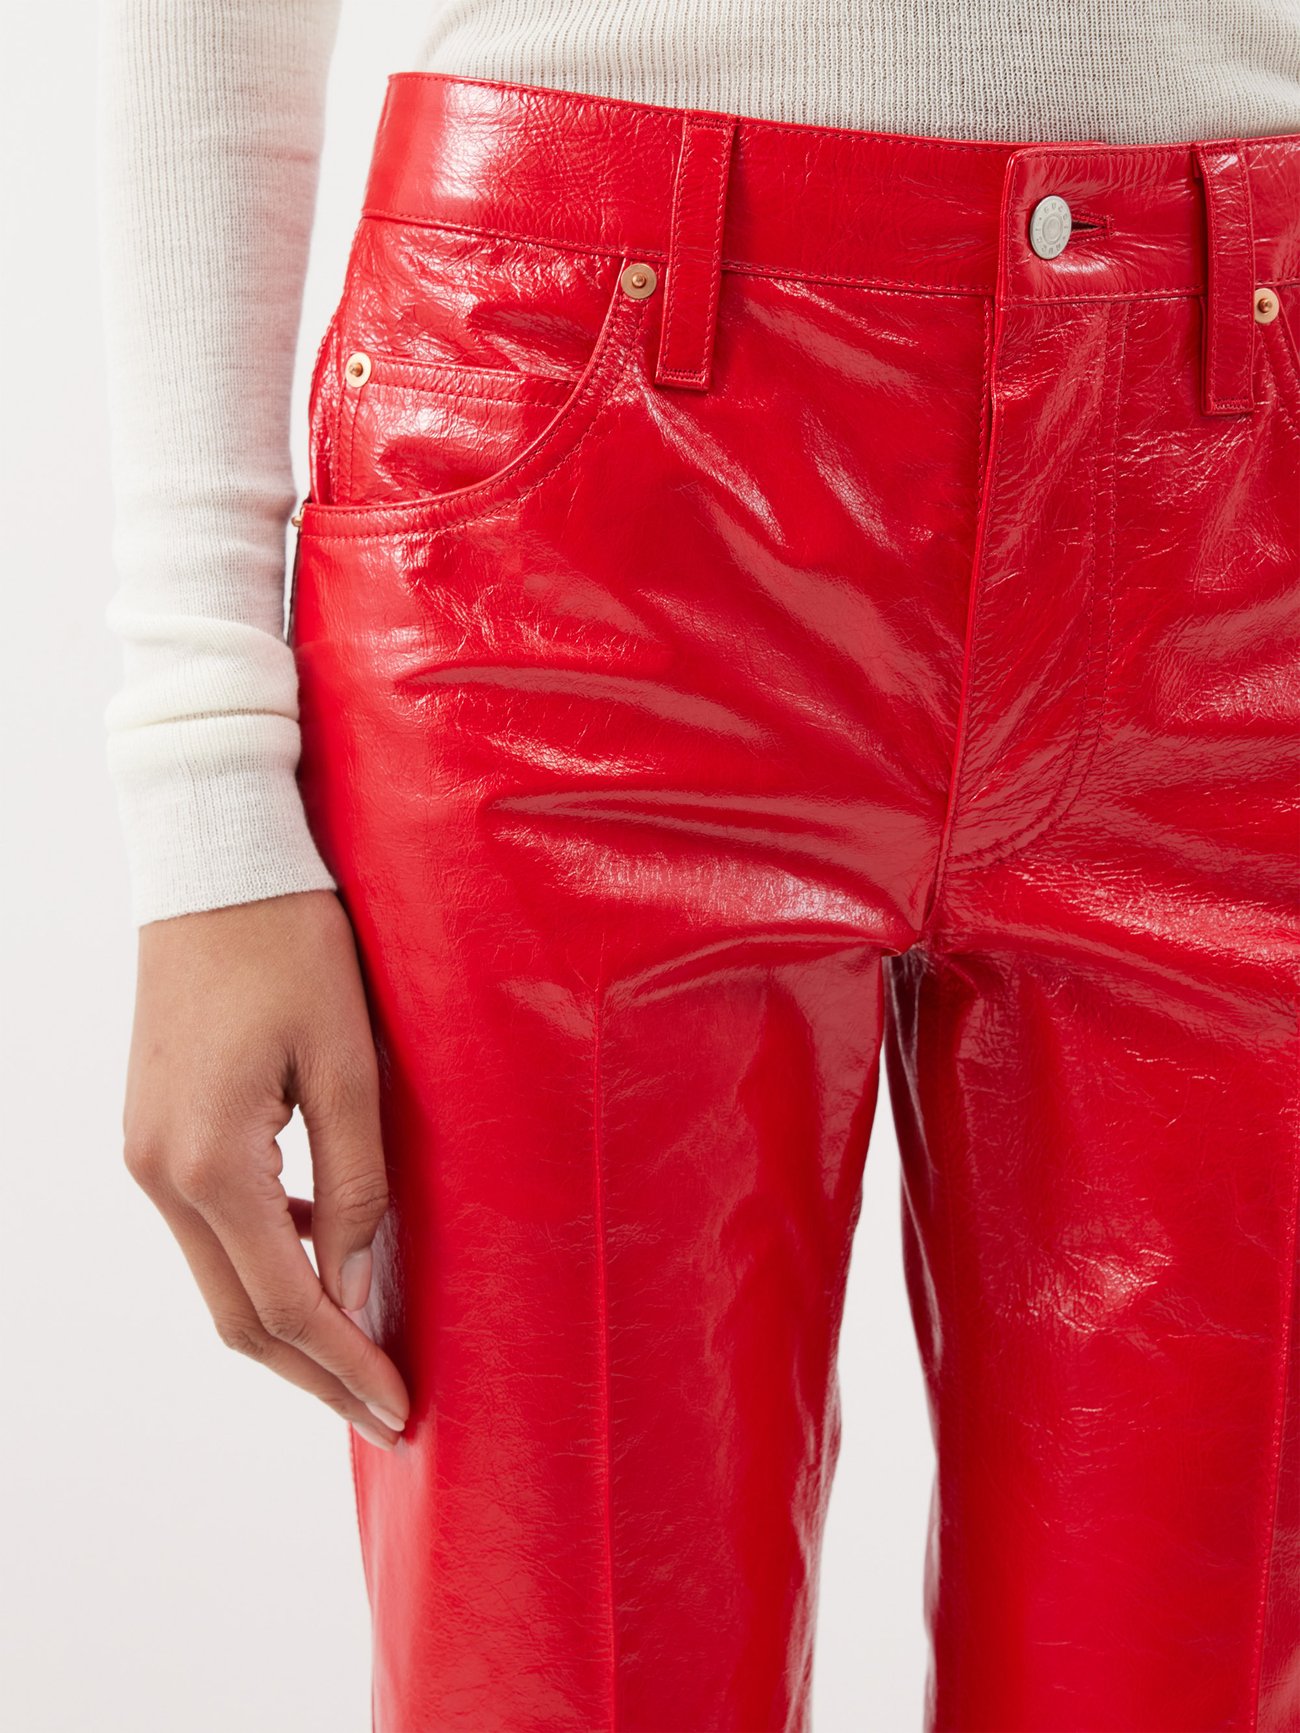 Gucci Women's Designer Red Leather Pants